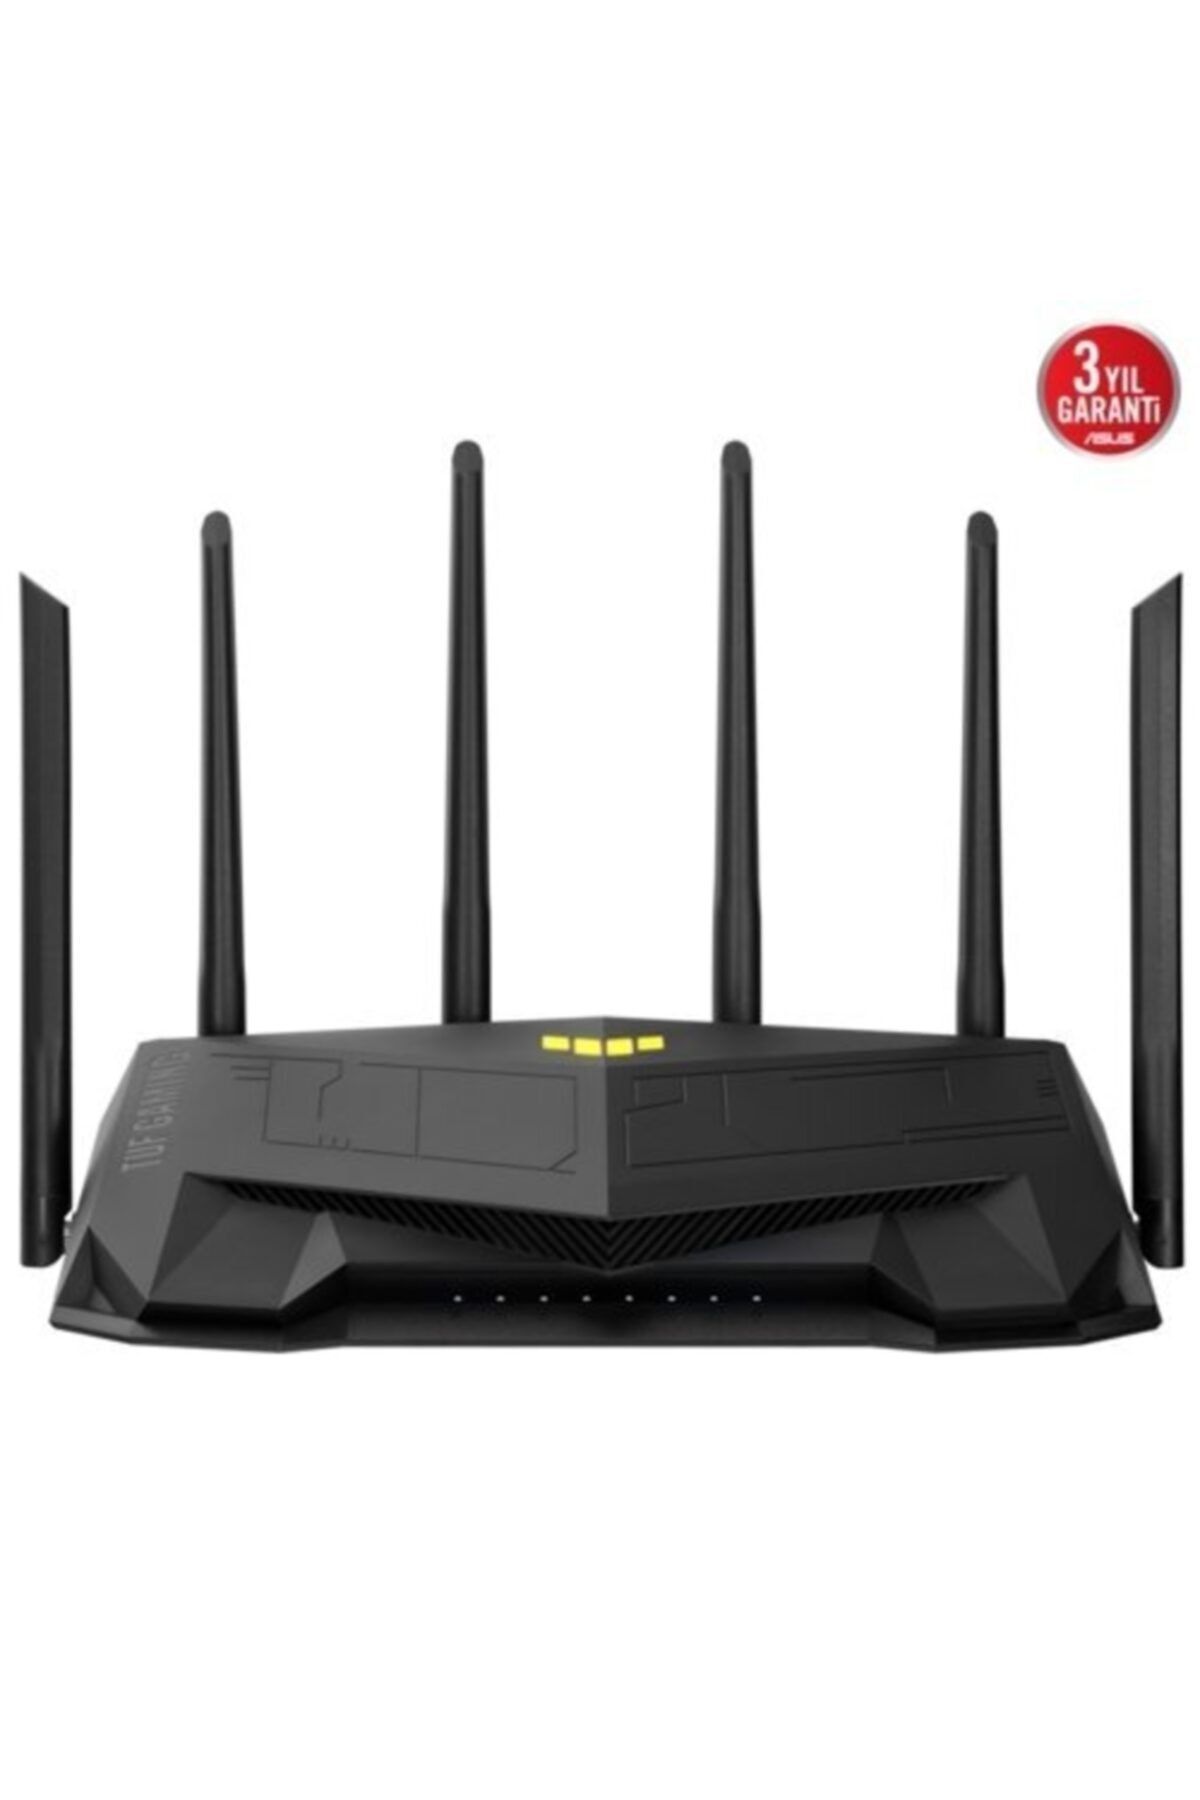 ASUS Tuf-ax5400 Ax5400 Dualband Wi-fi6 Router